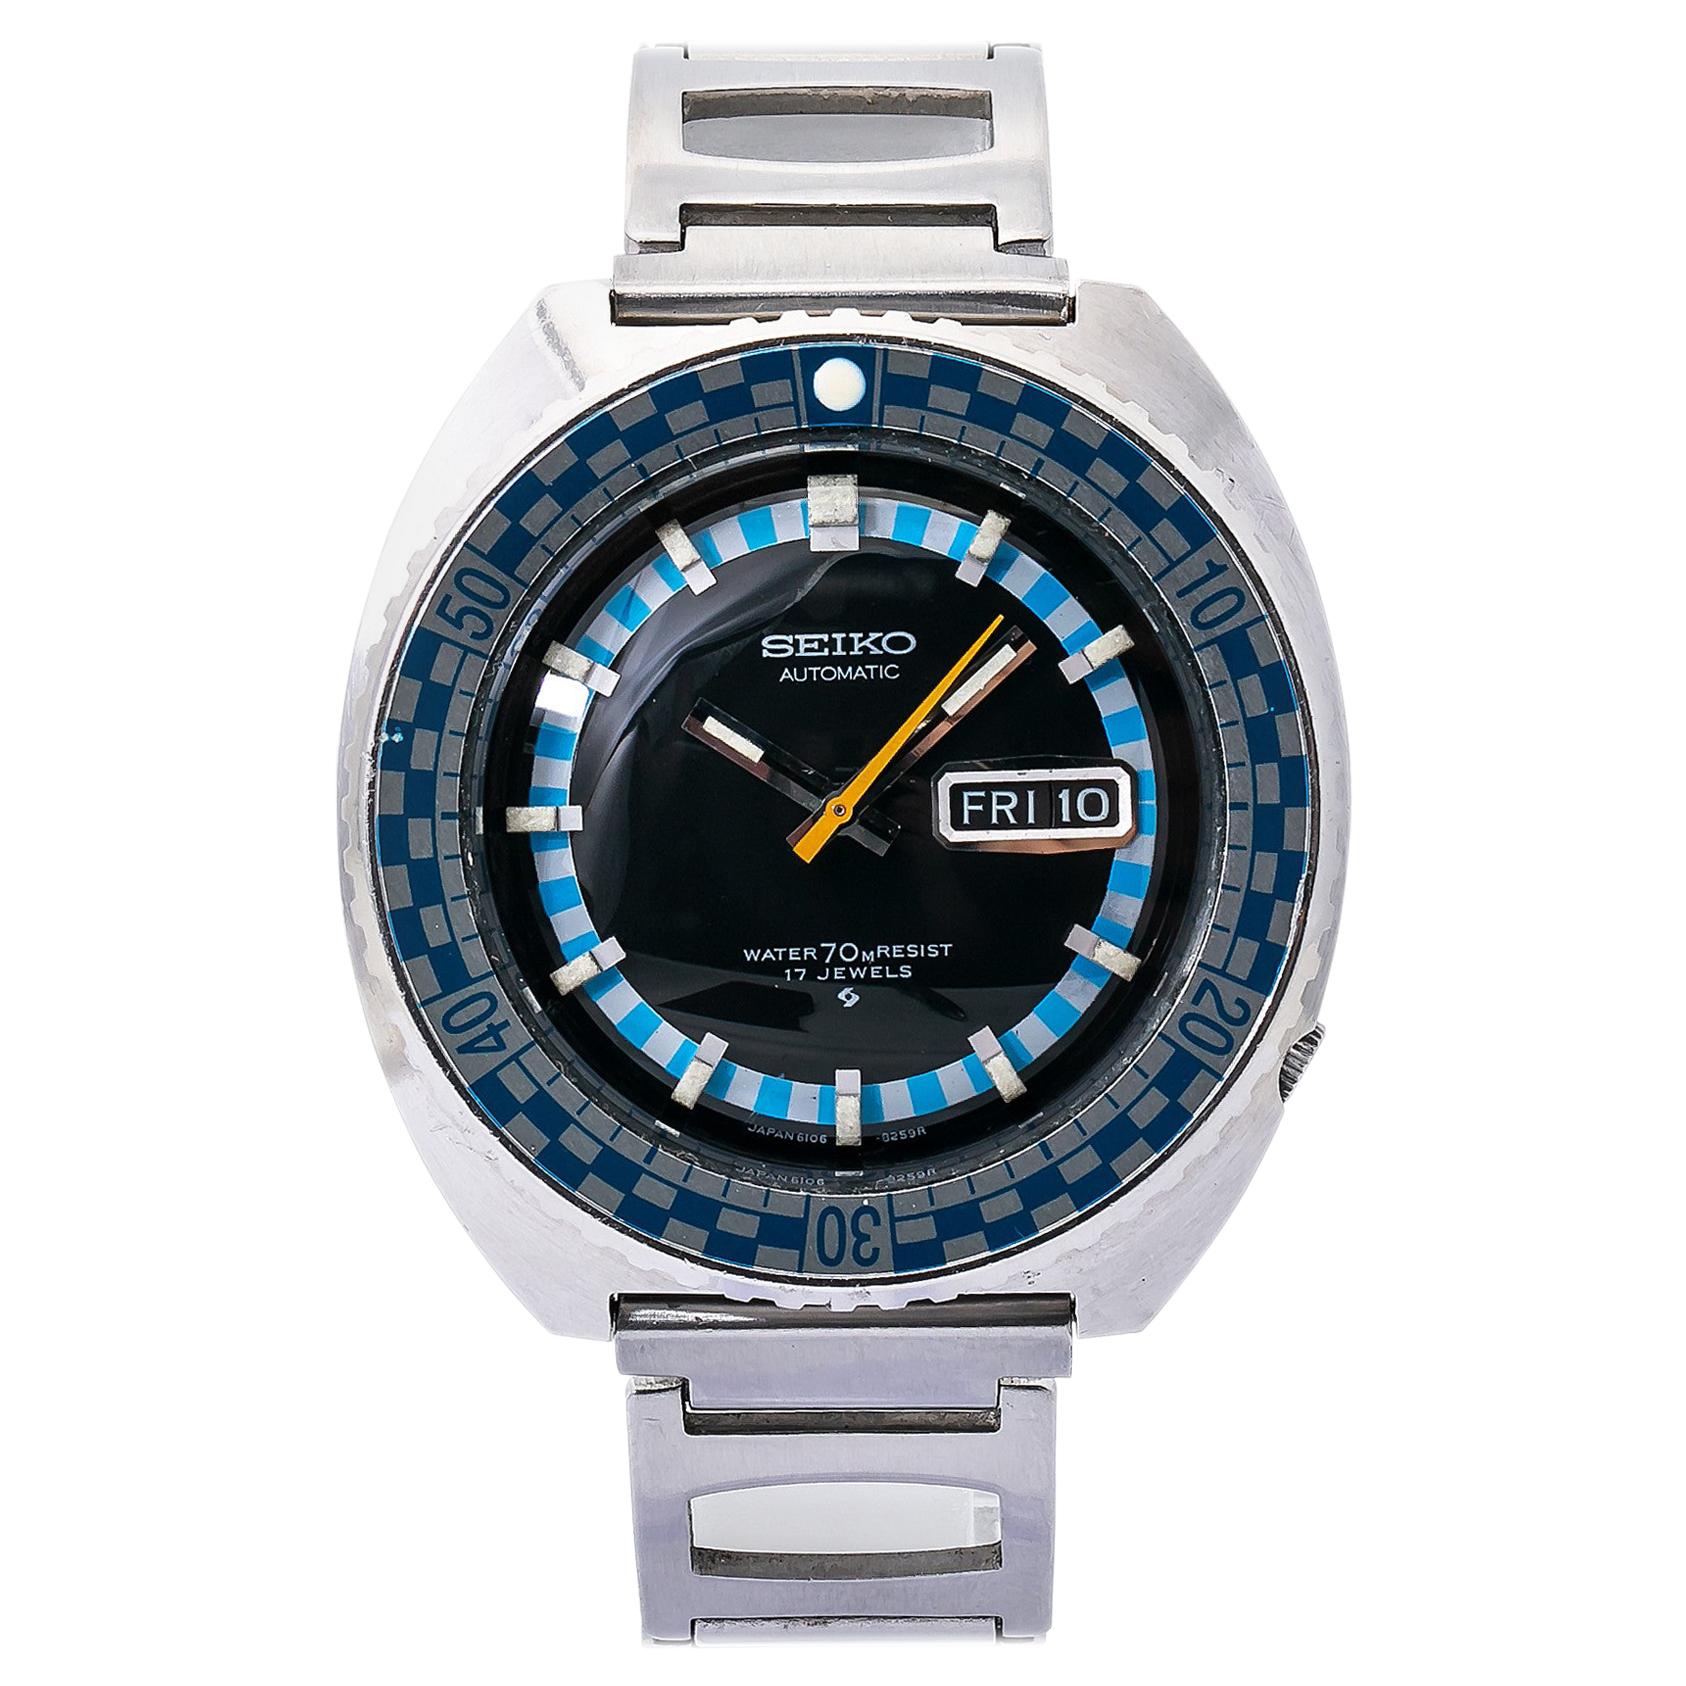 Seiko Rally Diver 6106-8227, Black Dial, Certified and Warranty